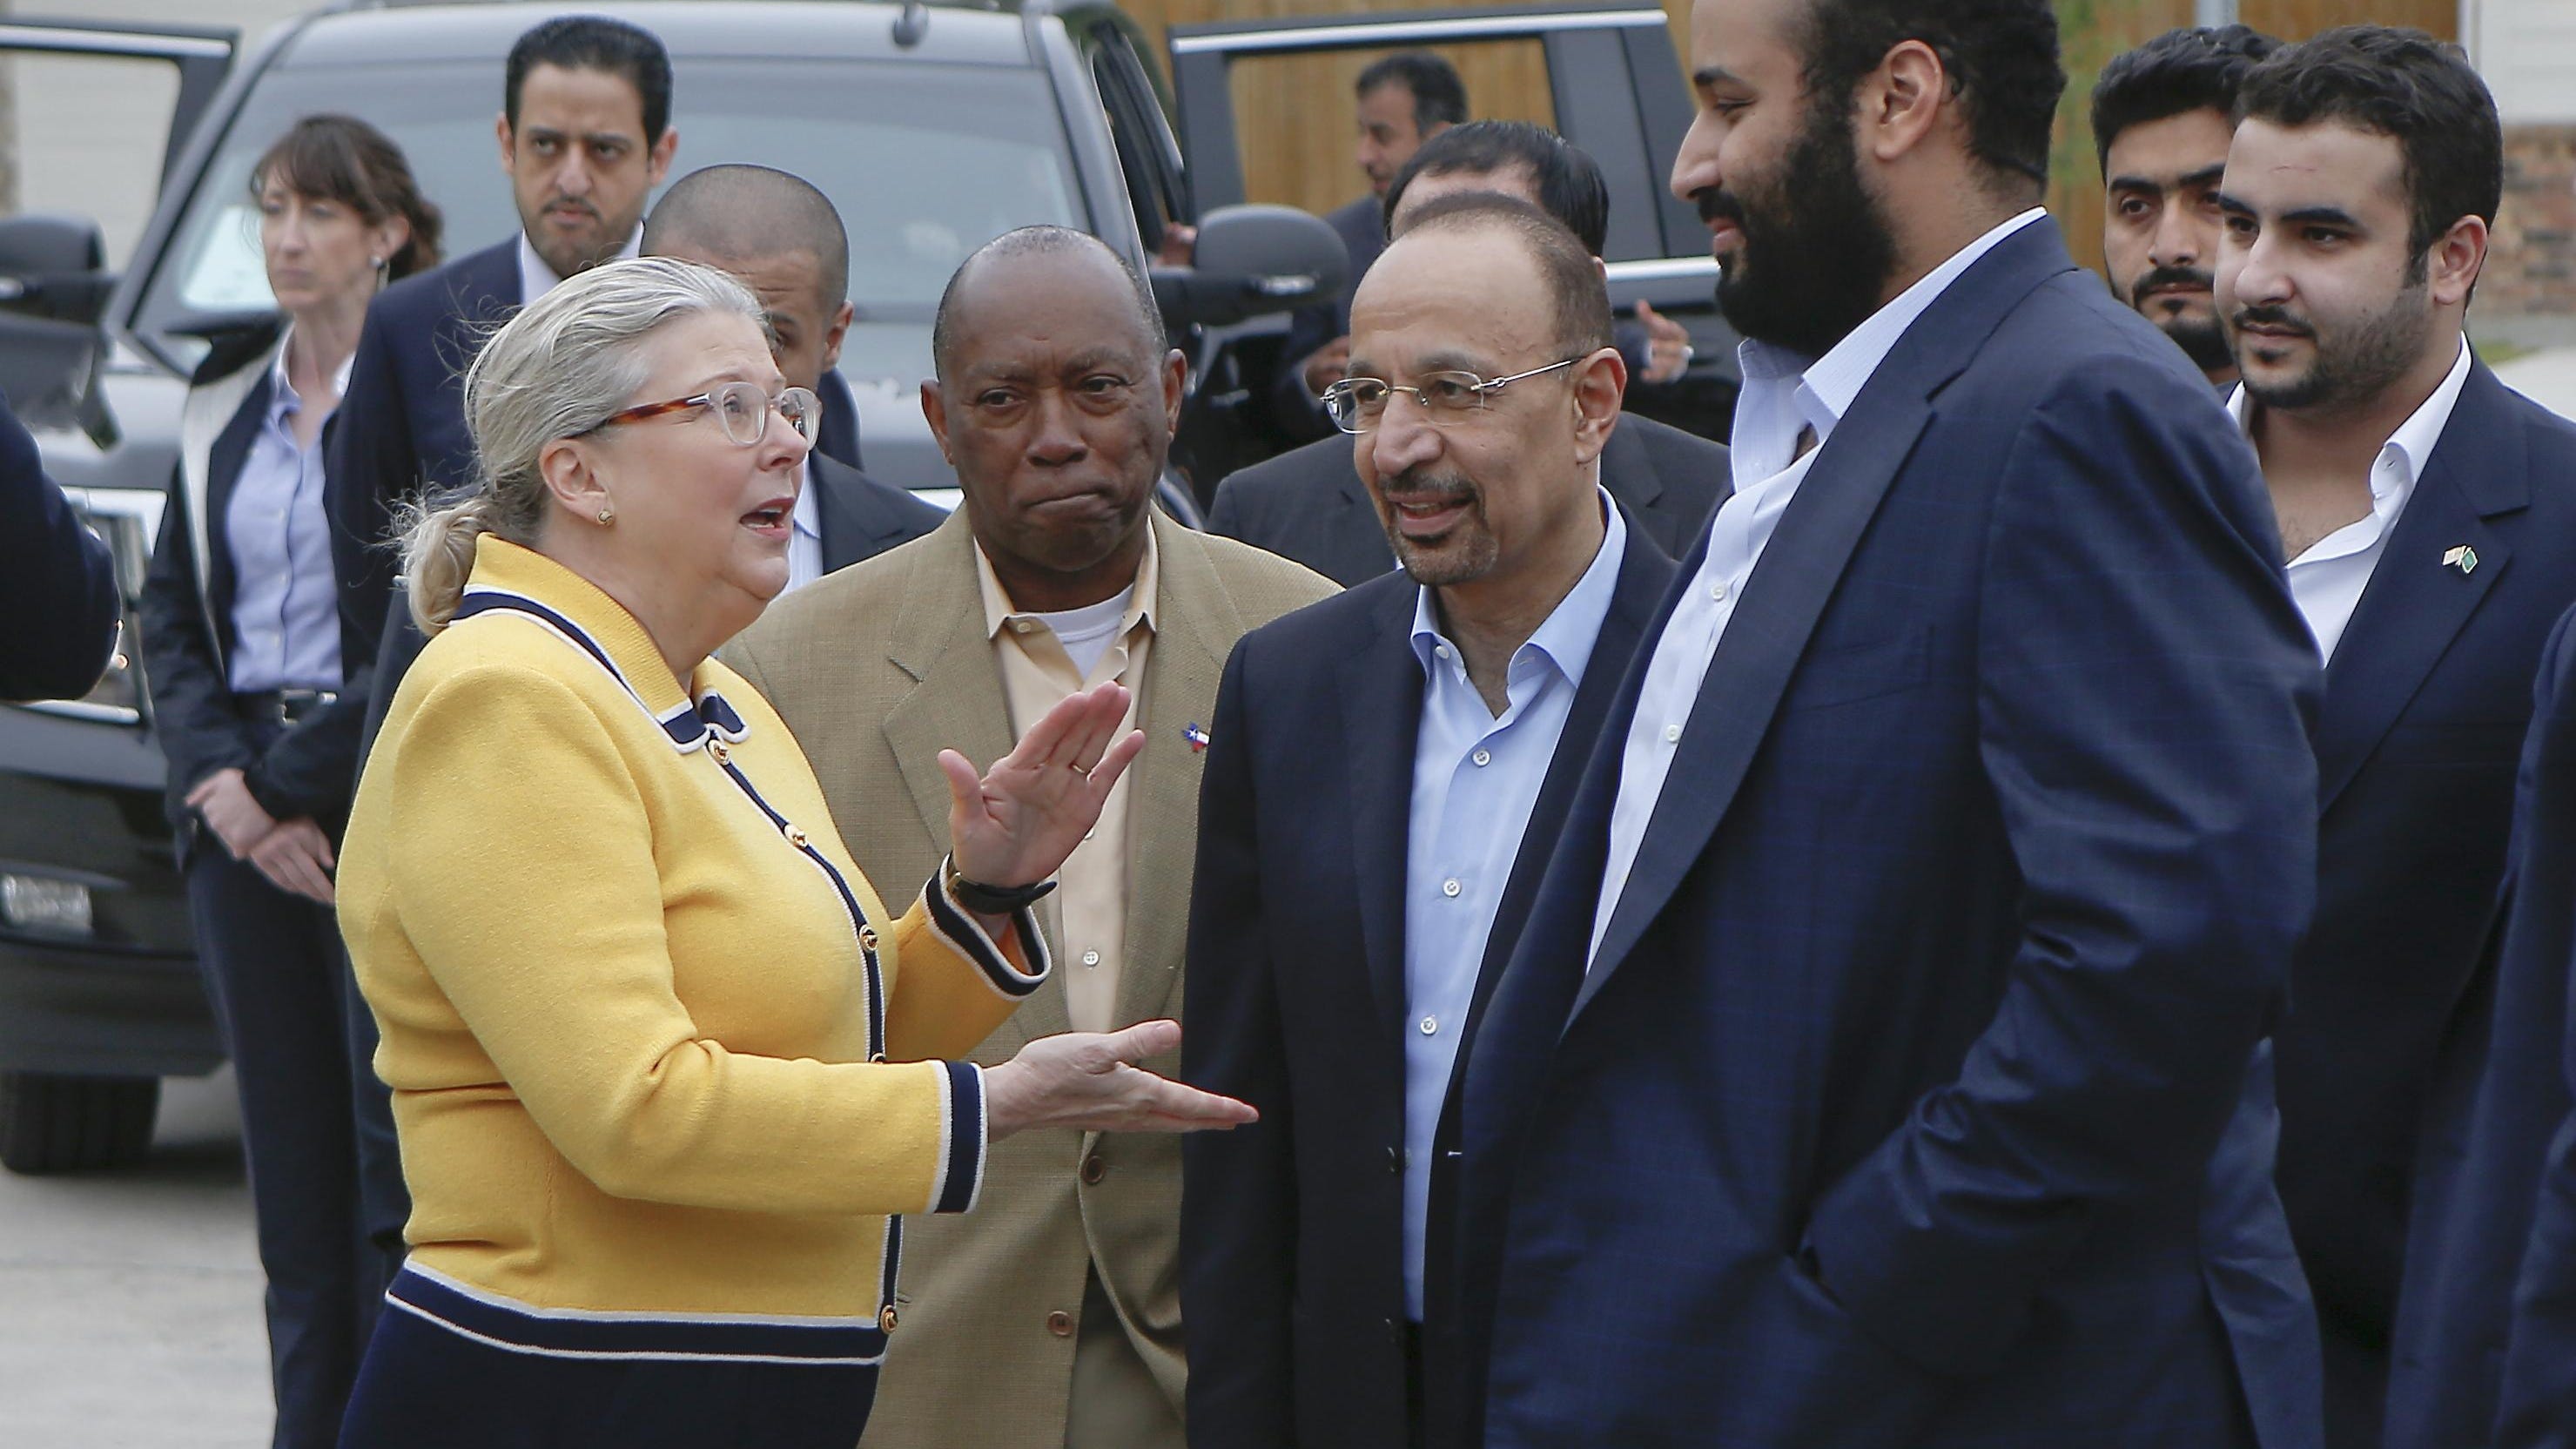 In this April 7, 2018, file photo, Saudi Crown Prince Mohammed bin Salman, right, is seen with his entourage as he tours a flood-damaged area in Houston, Texas. The man in the photo, rear second left, is allegedly the same individual in images that a pro-government Turkish newspaper published who was seen on surveillance video walking into the Saudi Consulate in Istanbul before writer Jamal Khashoggi vanished there.